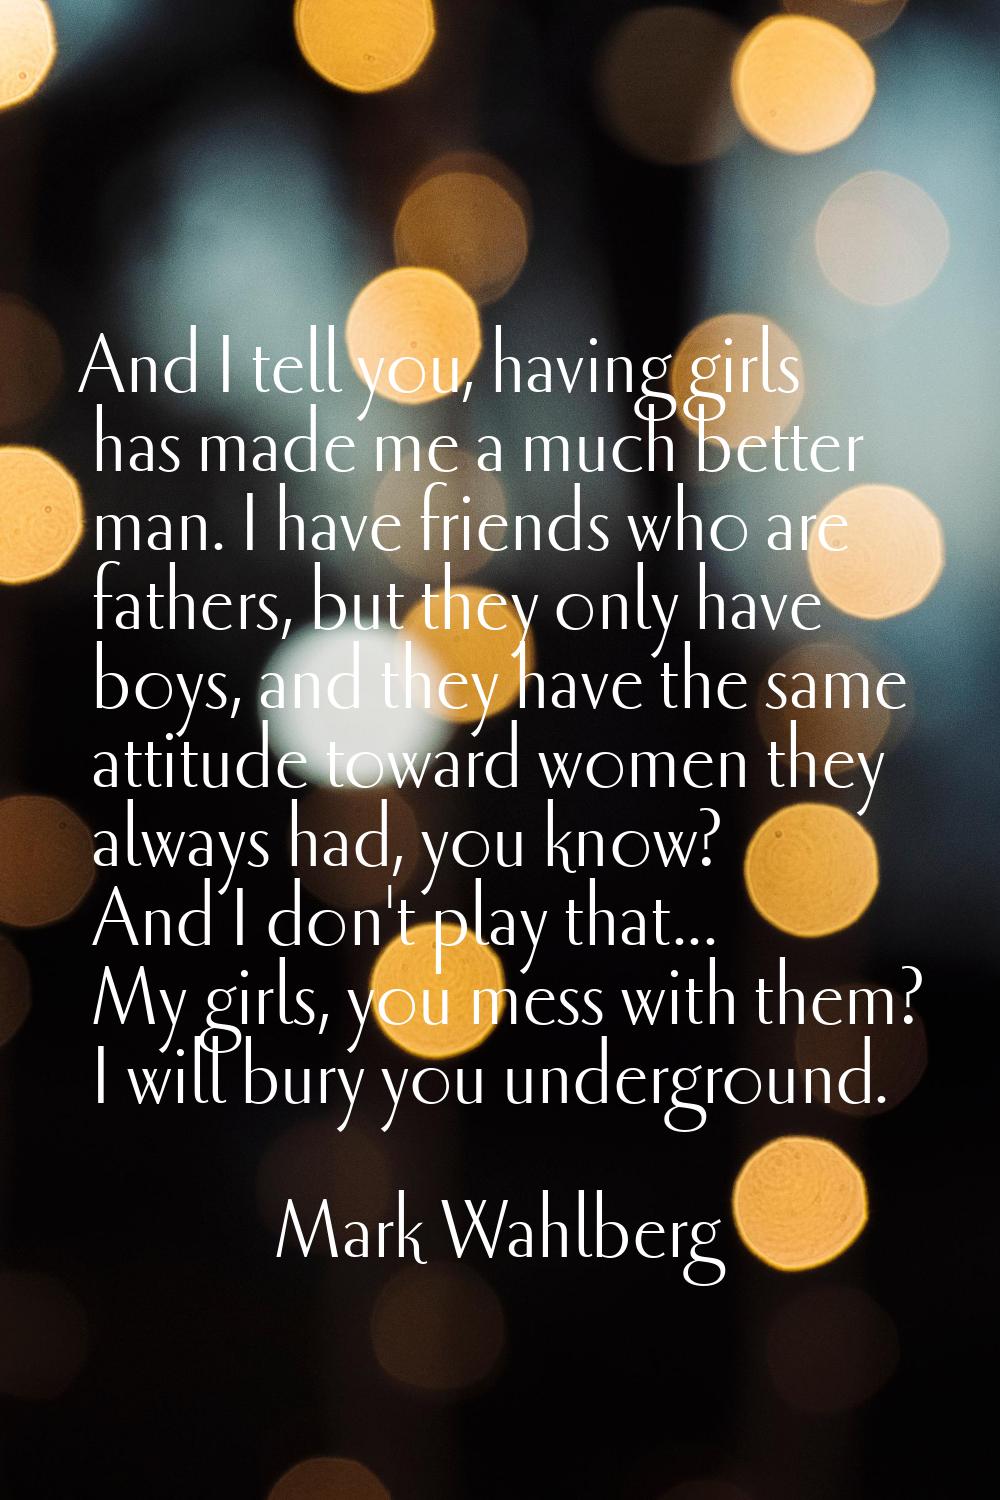 And I tell you, having girls has made me a much better man. I have friends who are fathers, but the